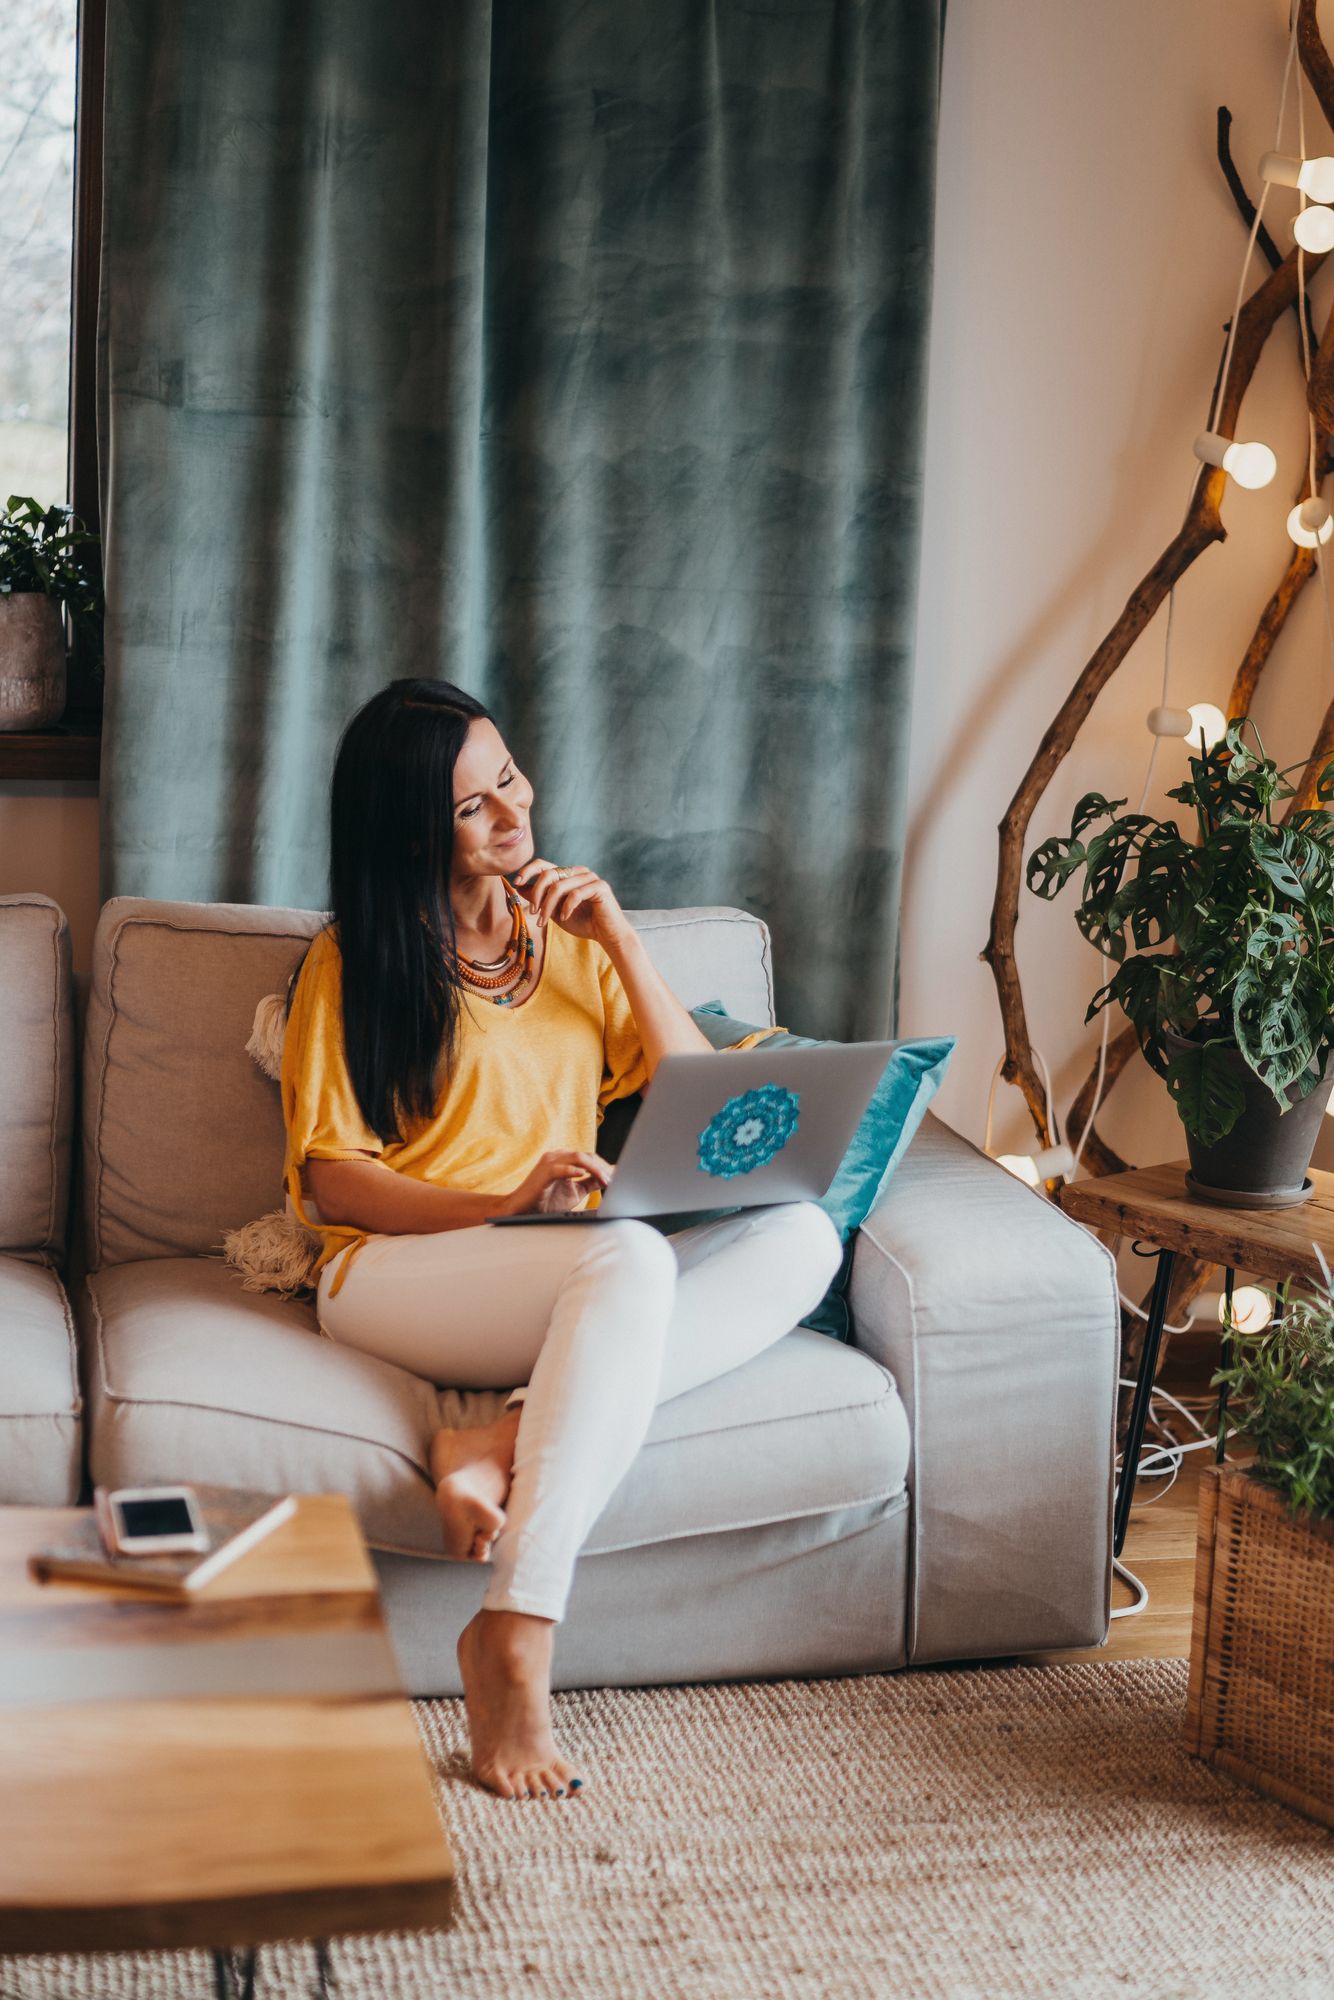 A female business coach sitting on a couch in a cozy living room, smiling and working on her laptop.